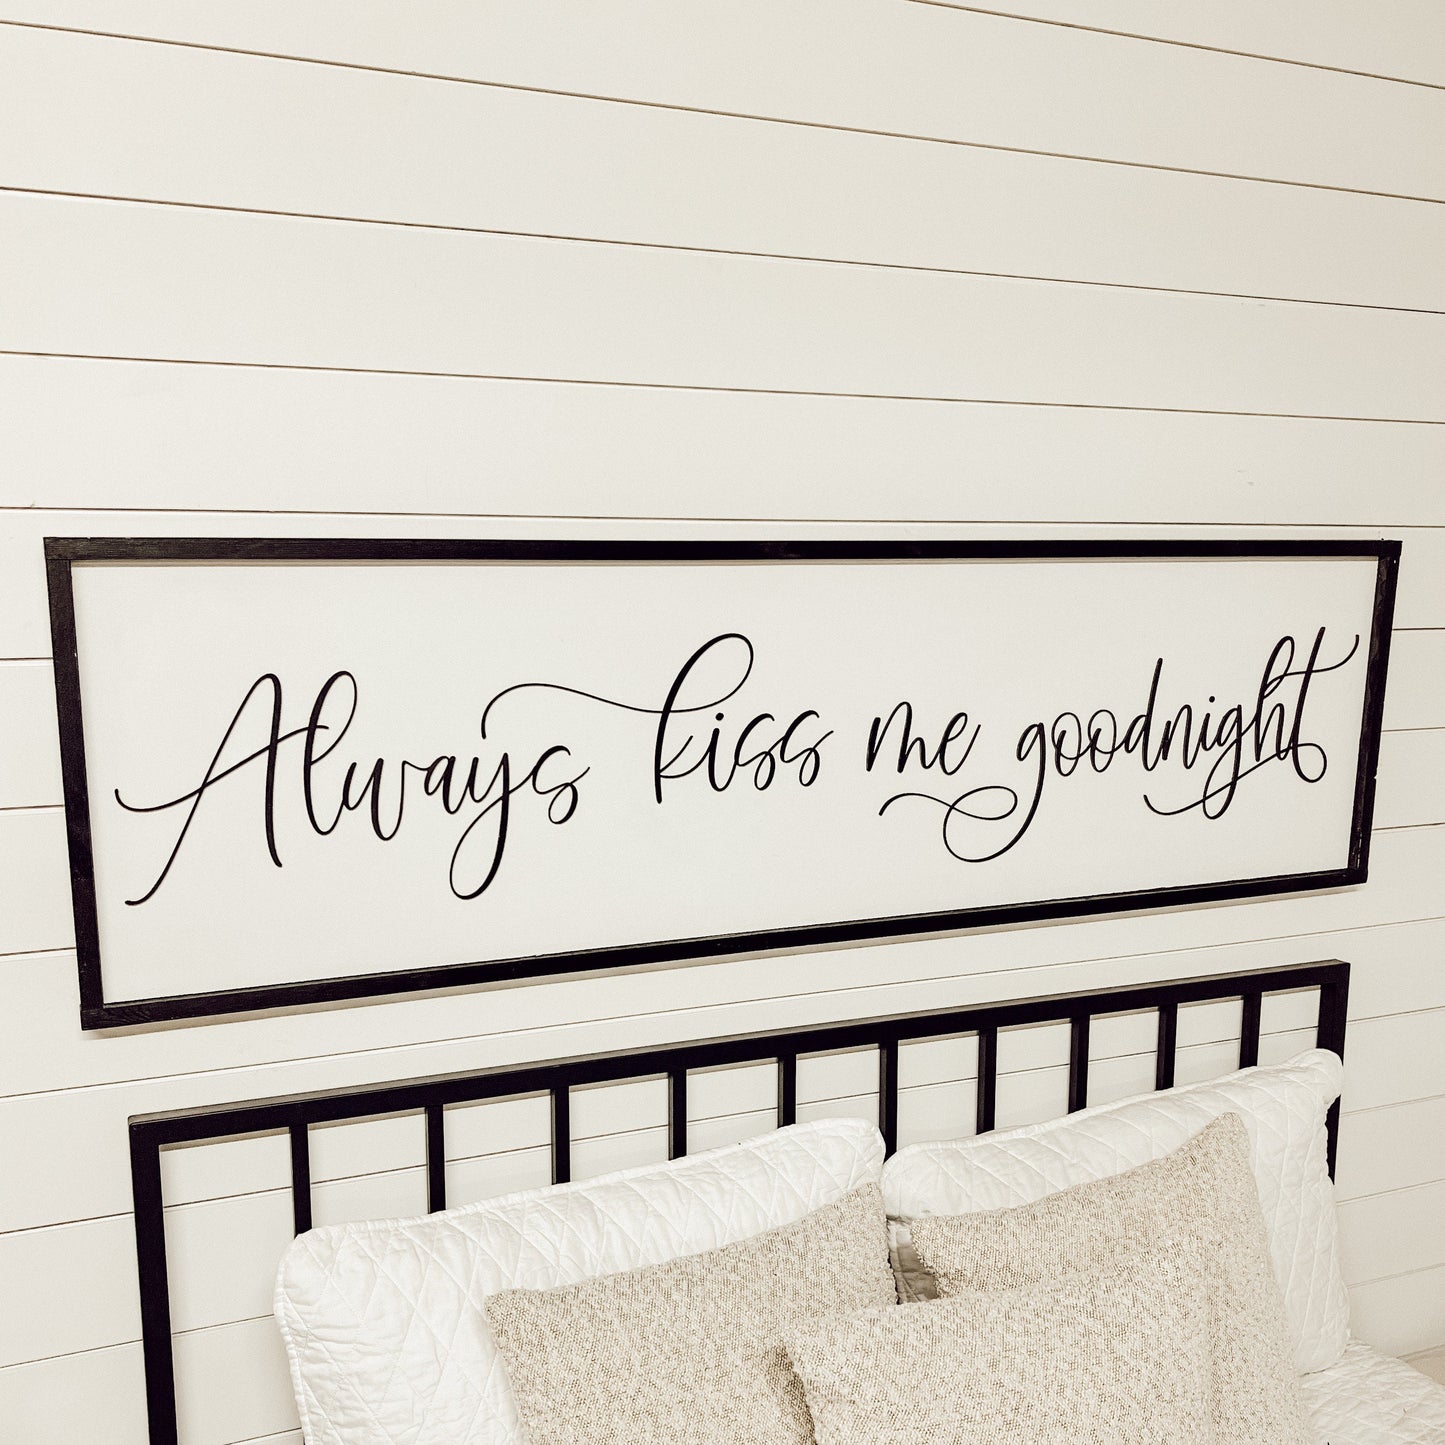 always kiss me goodnight - above over the bed sign - master bedroom [FREE SHIPPING!]